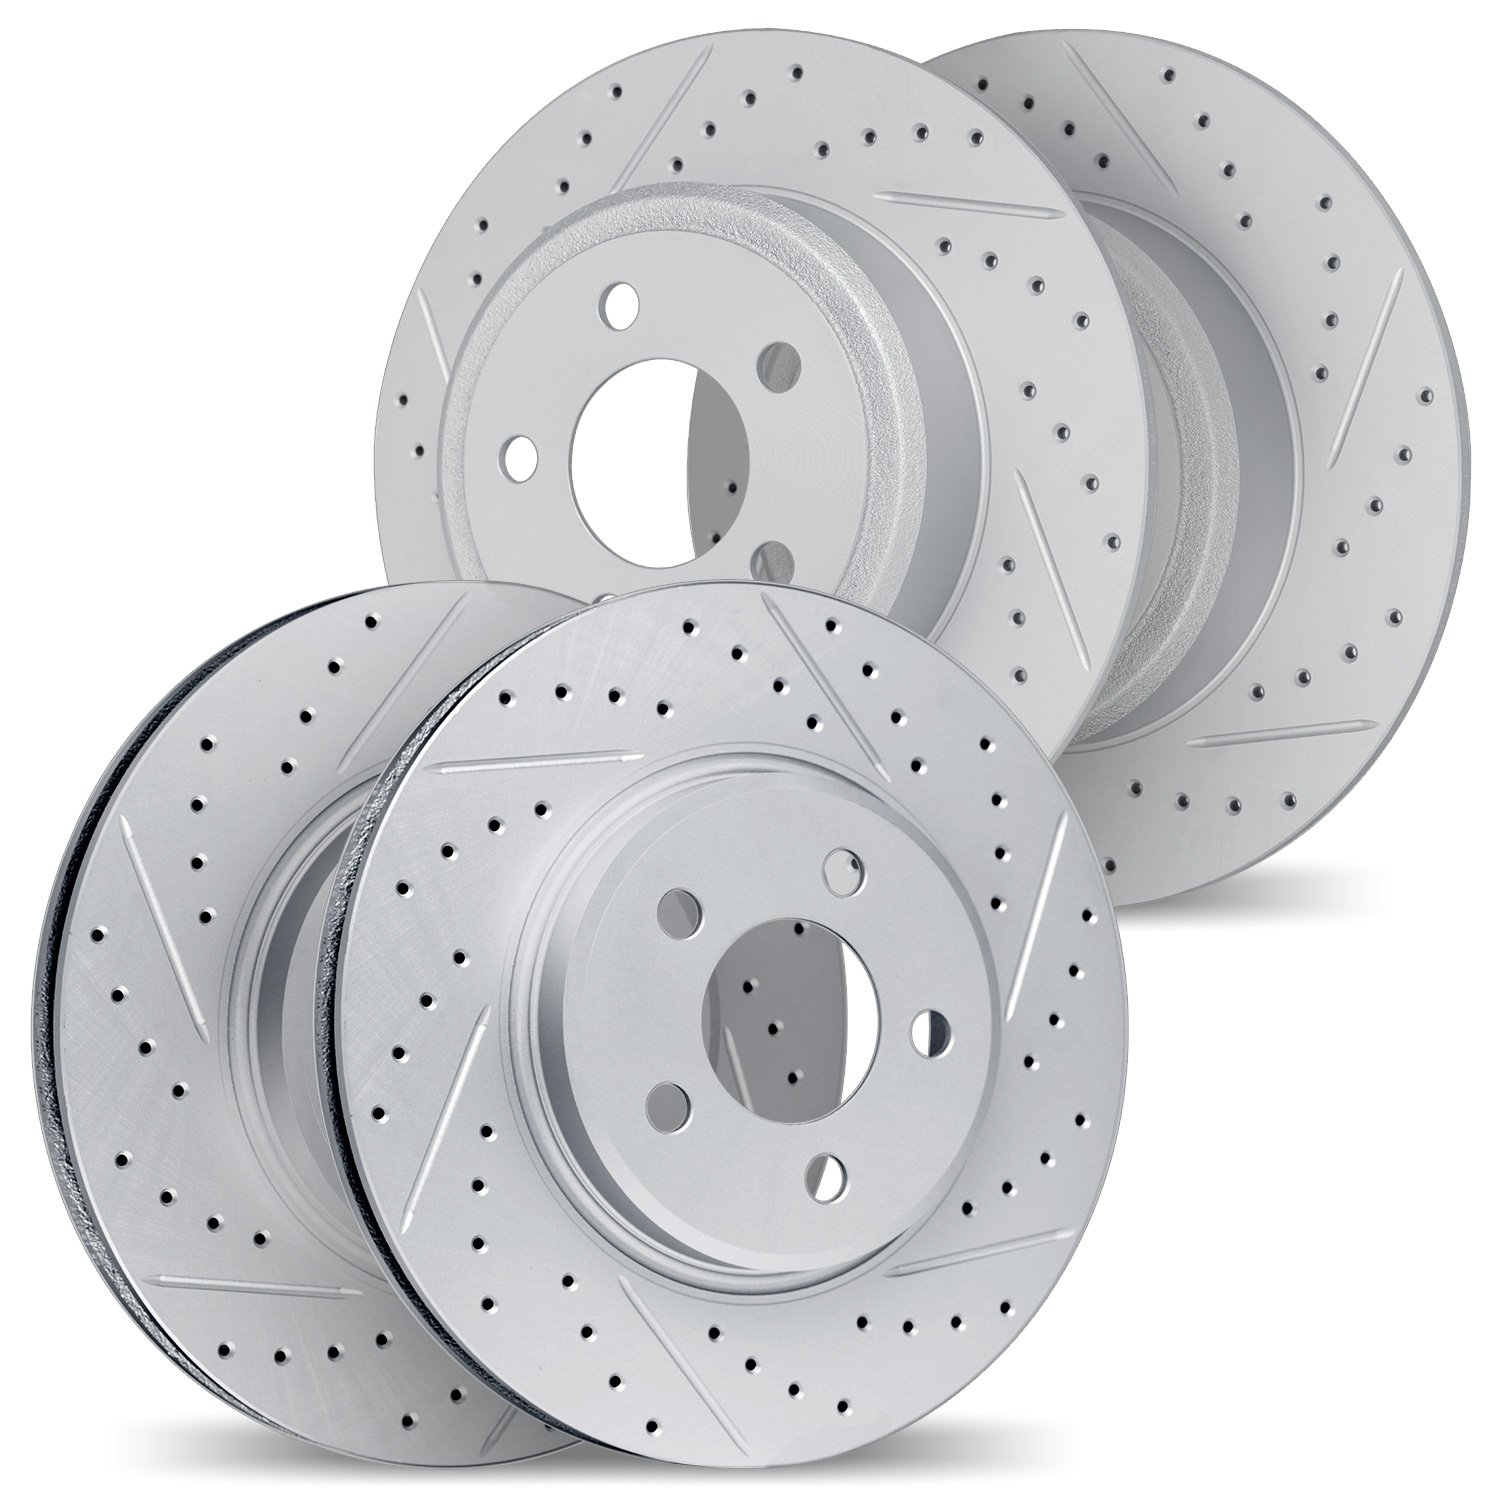 2004-73000 Geoperformance Drilled/Slotted Brake Rotors, 1992-2005 Audi/Volkswagen, Position: Front and Rear